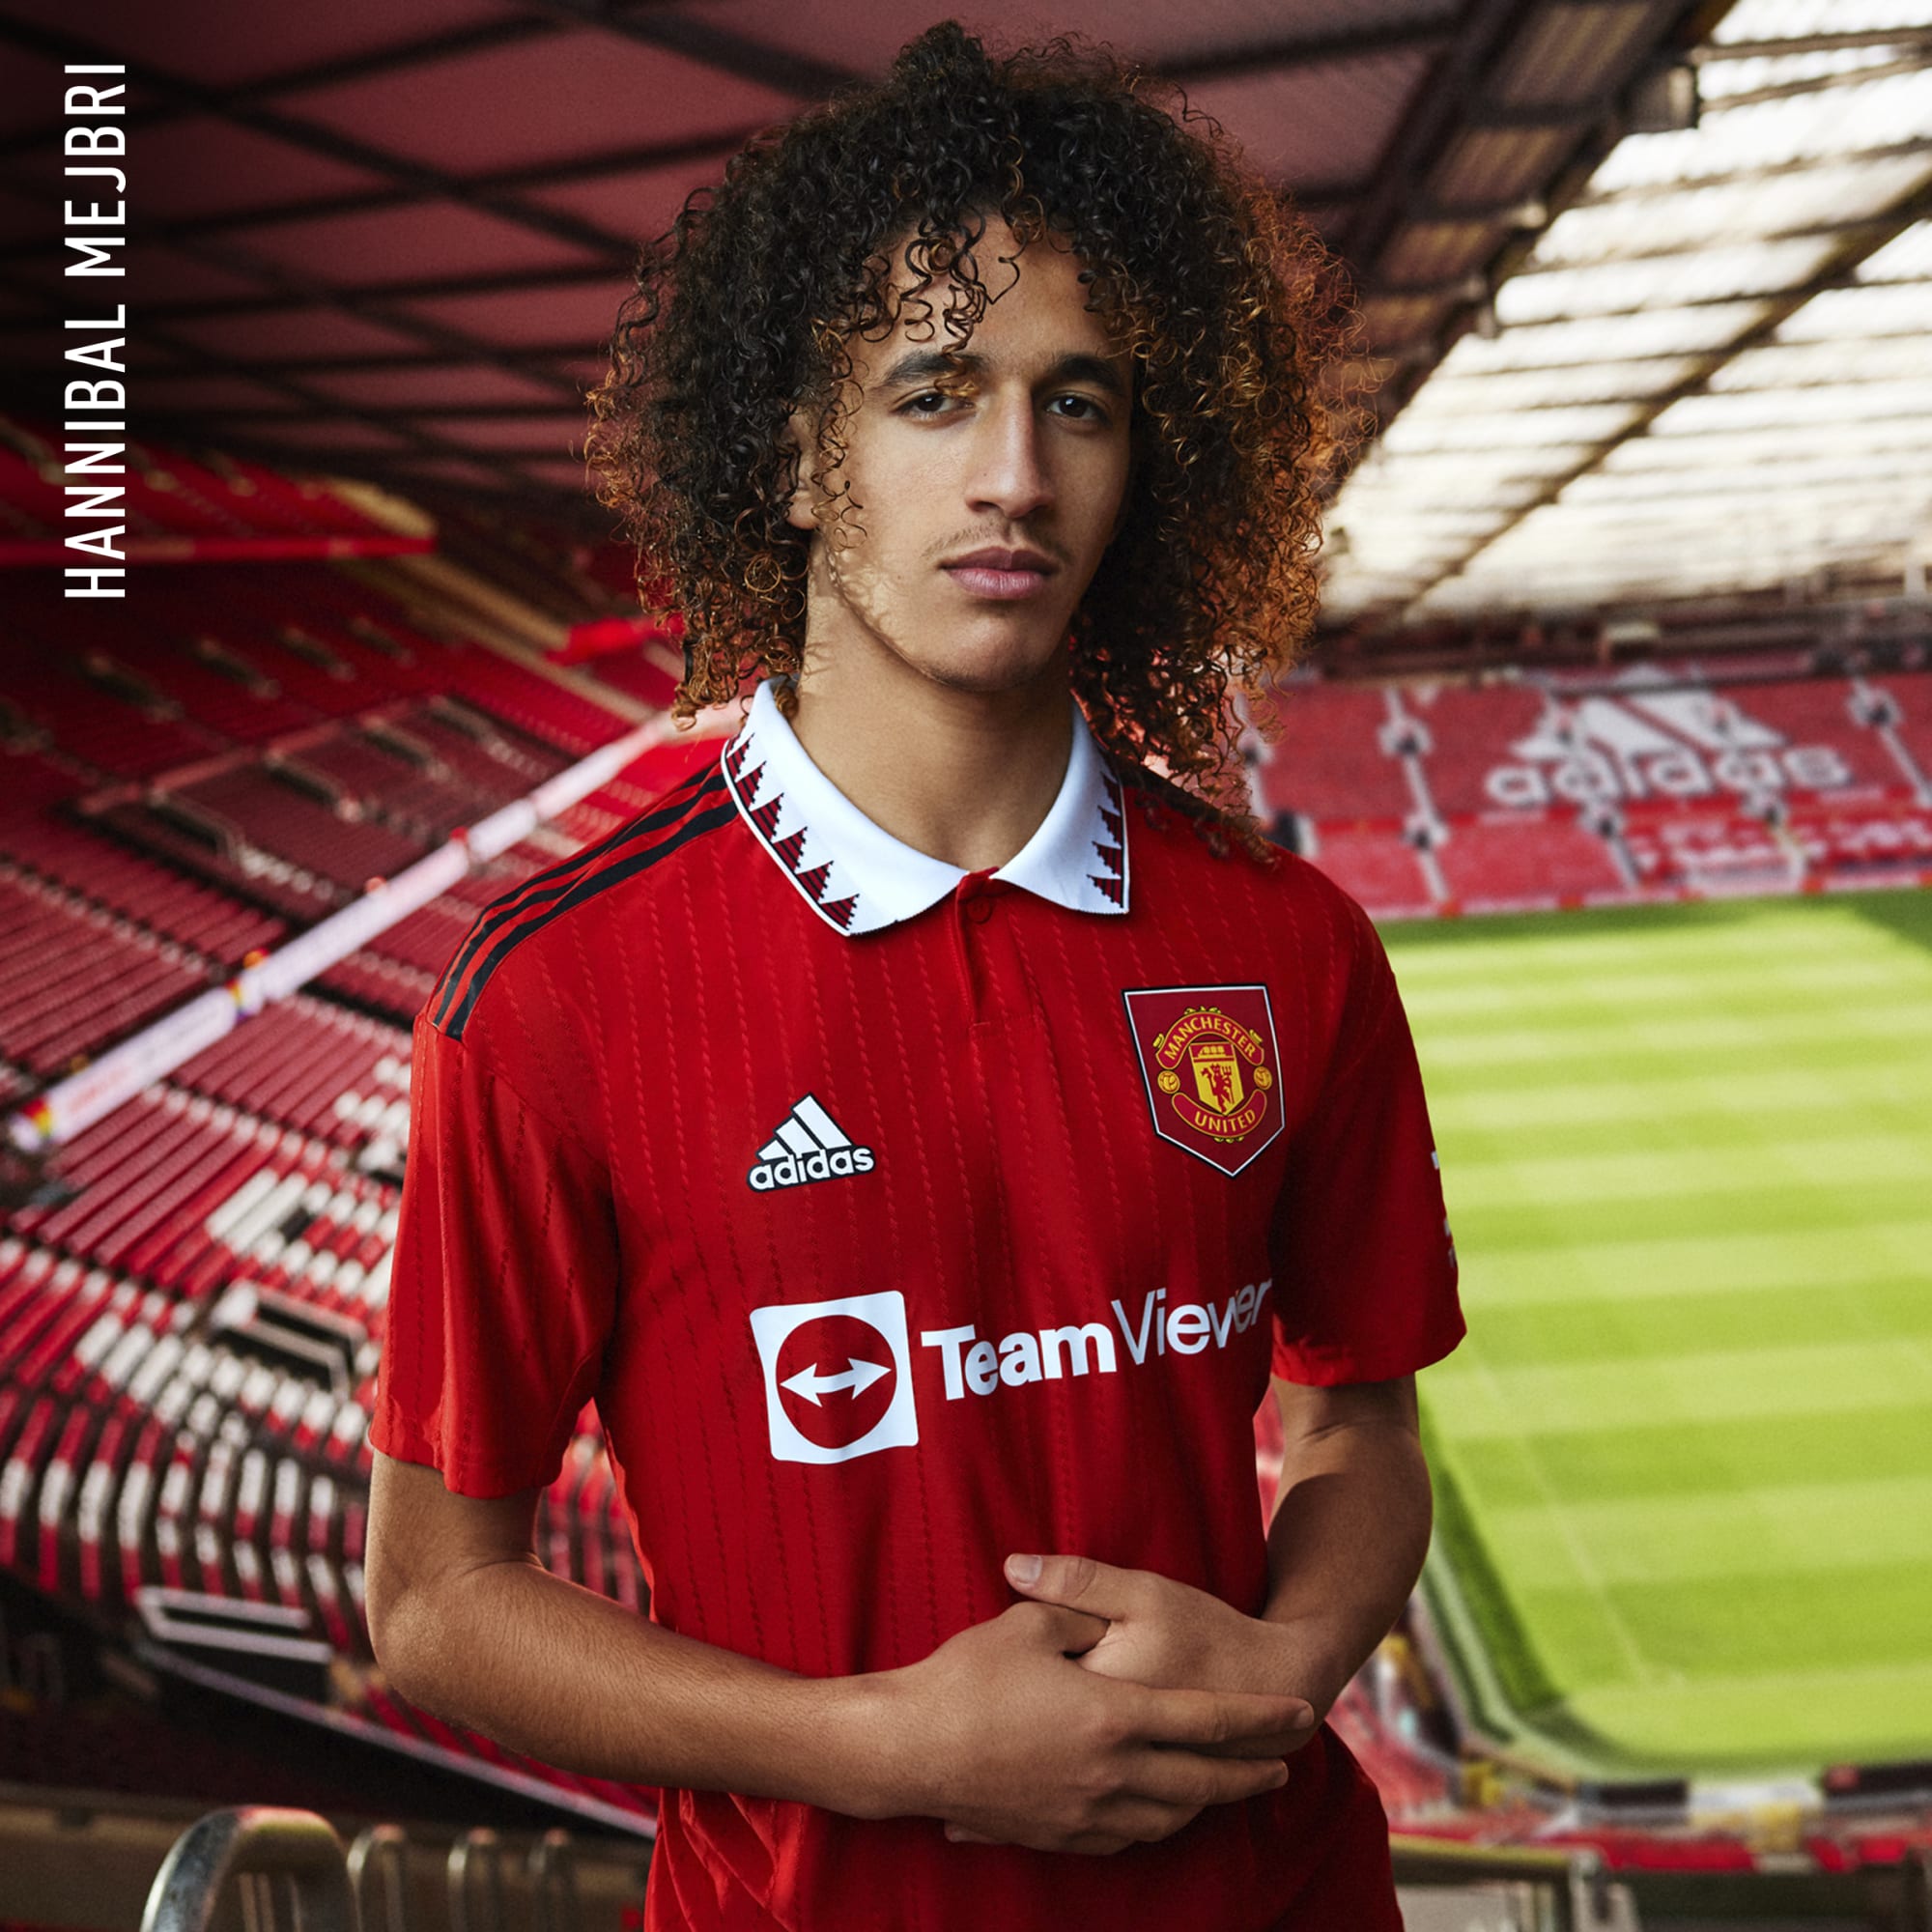 kans Terughoudendheid Aanhoudend Manchester United 2022-23 Adidas Home Kit - Football Shirt Culture - Latest  Football Kit News and More